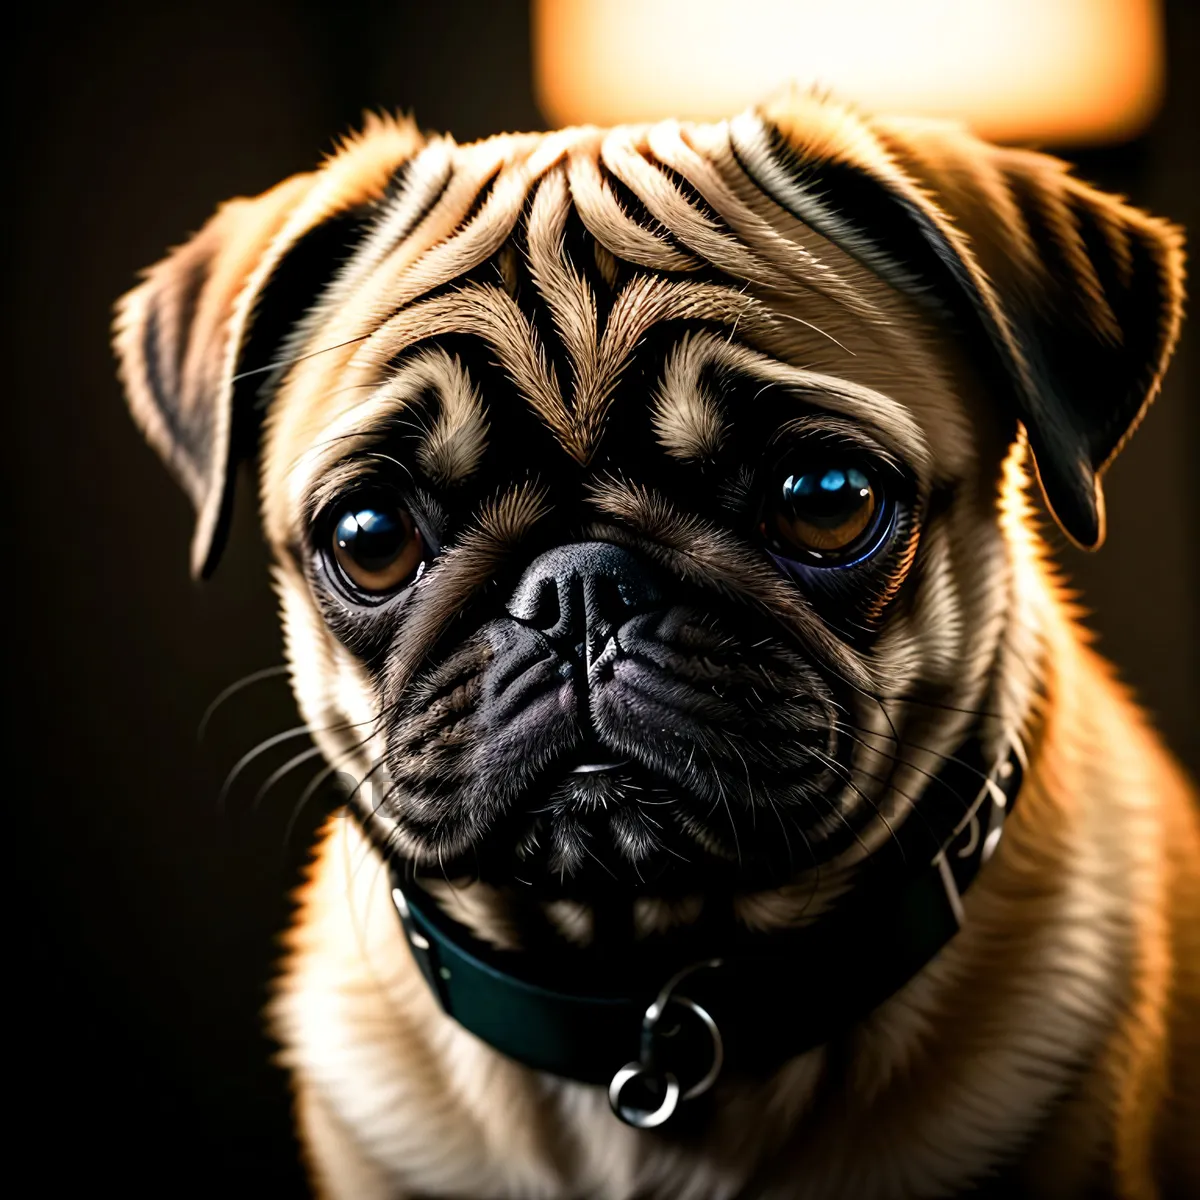 Picture of Adorable Pug Puppy - Cute Domestic Canine Friend